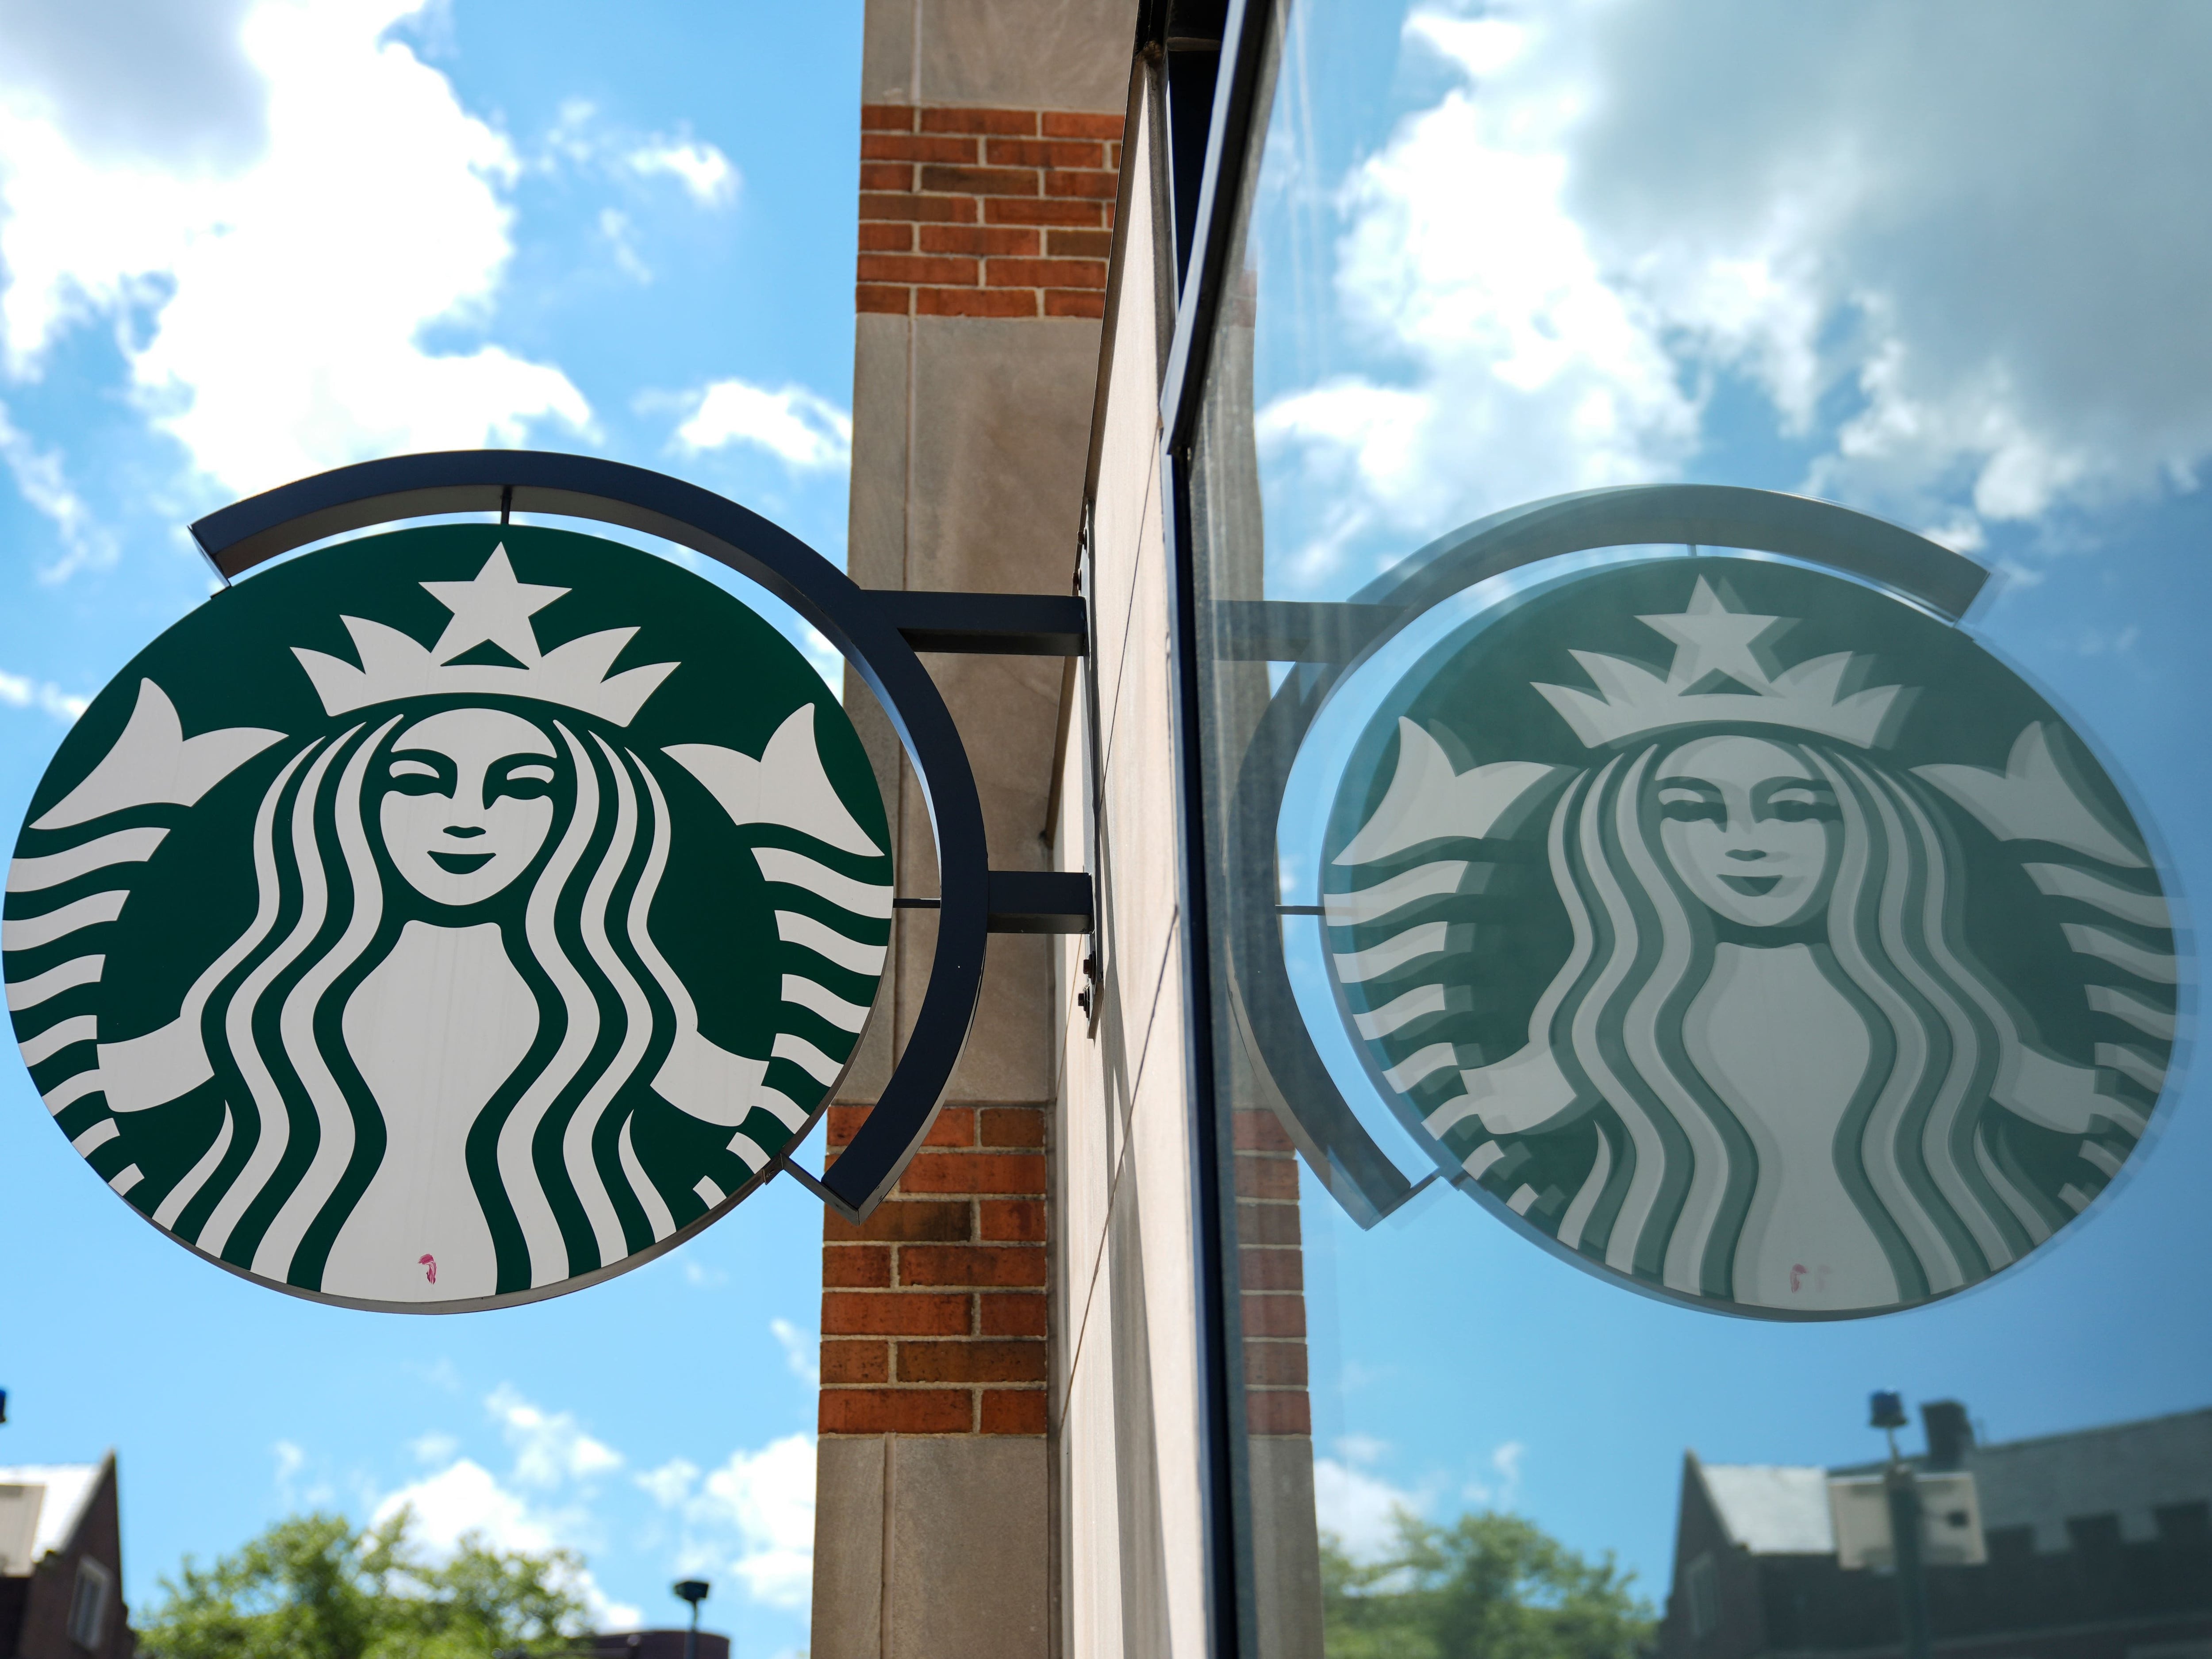 Starbucks reports quarterly sales fall as US and China customer traffic weakens